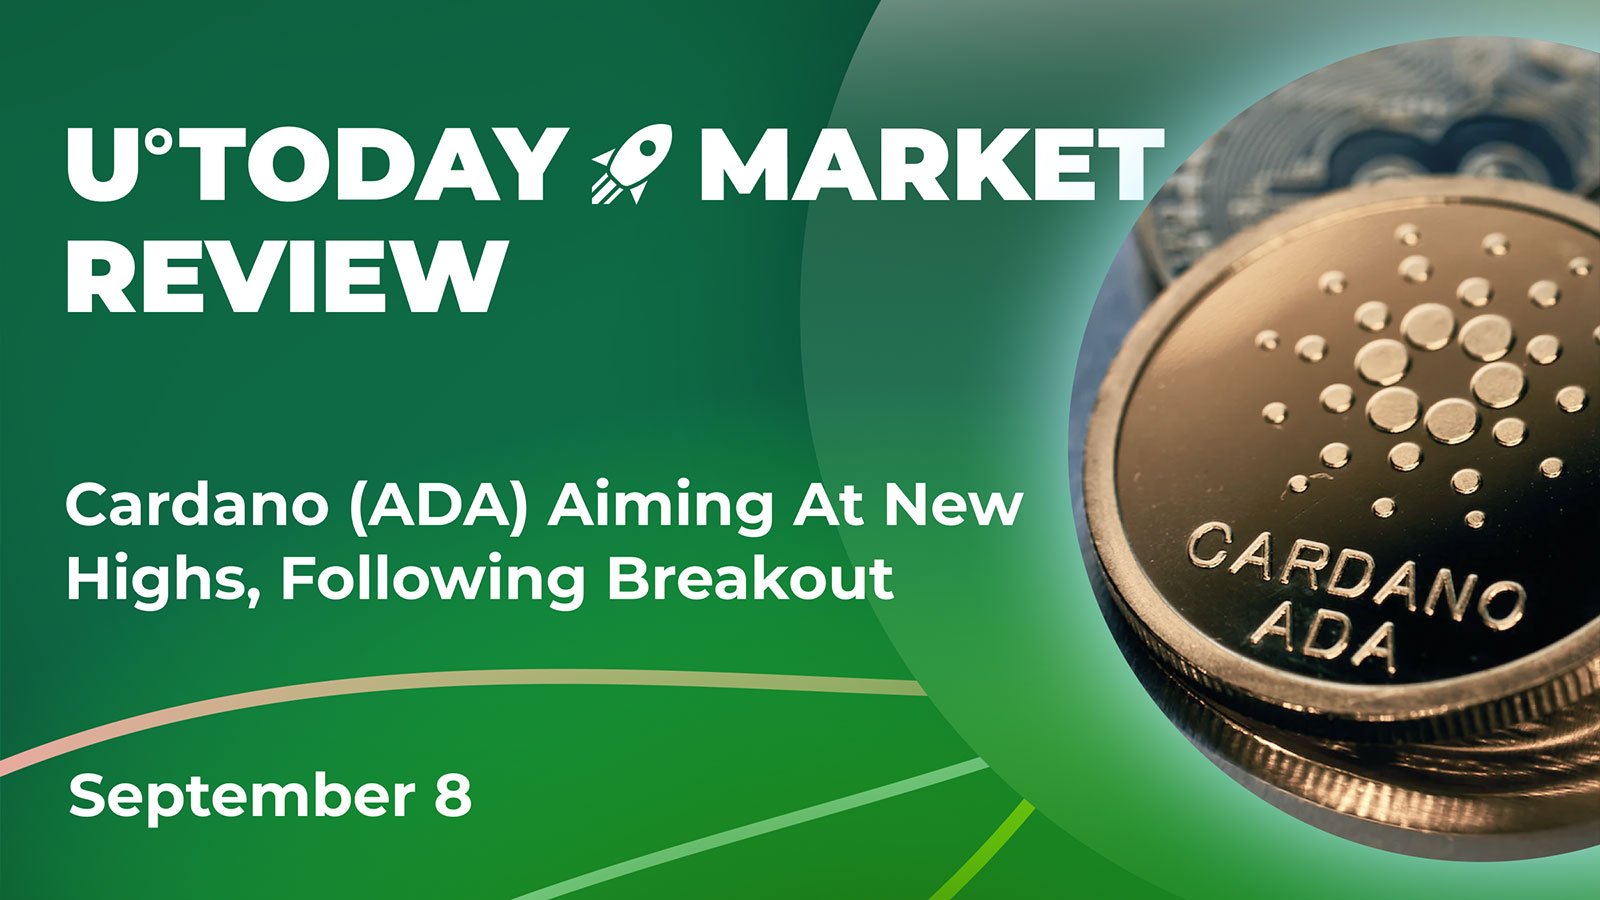 Cardano (ADA) Aiming at New Highs Following Breakout: Crypto Market Review, September 8